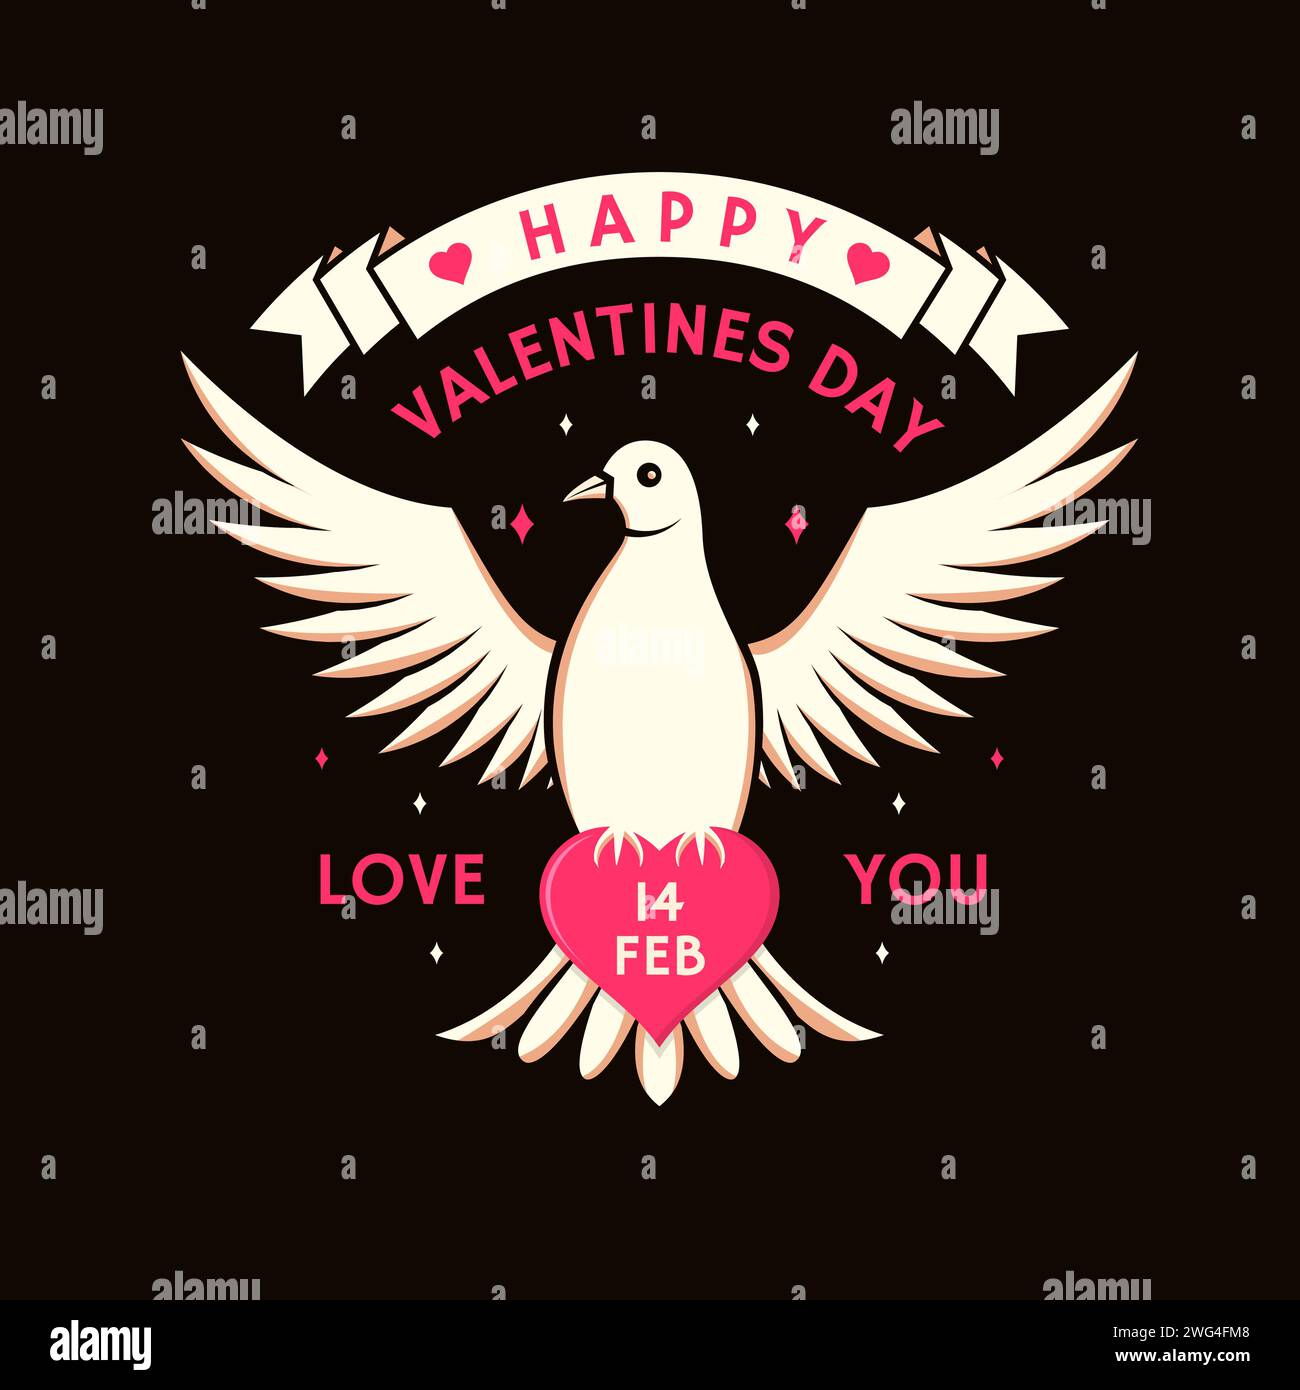 Happy valentines day. Vector illustration. Vintage with dove holding heart. Template for Valentine s Day greeting card, banner, poster, flyer with Stock Vector